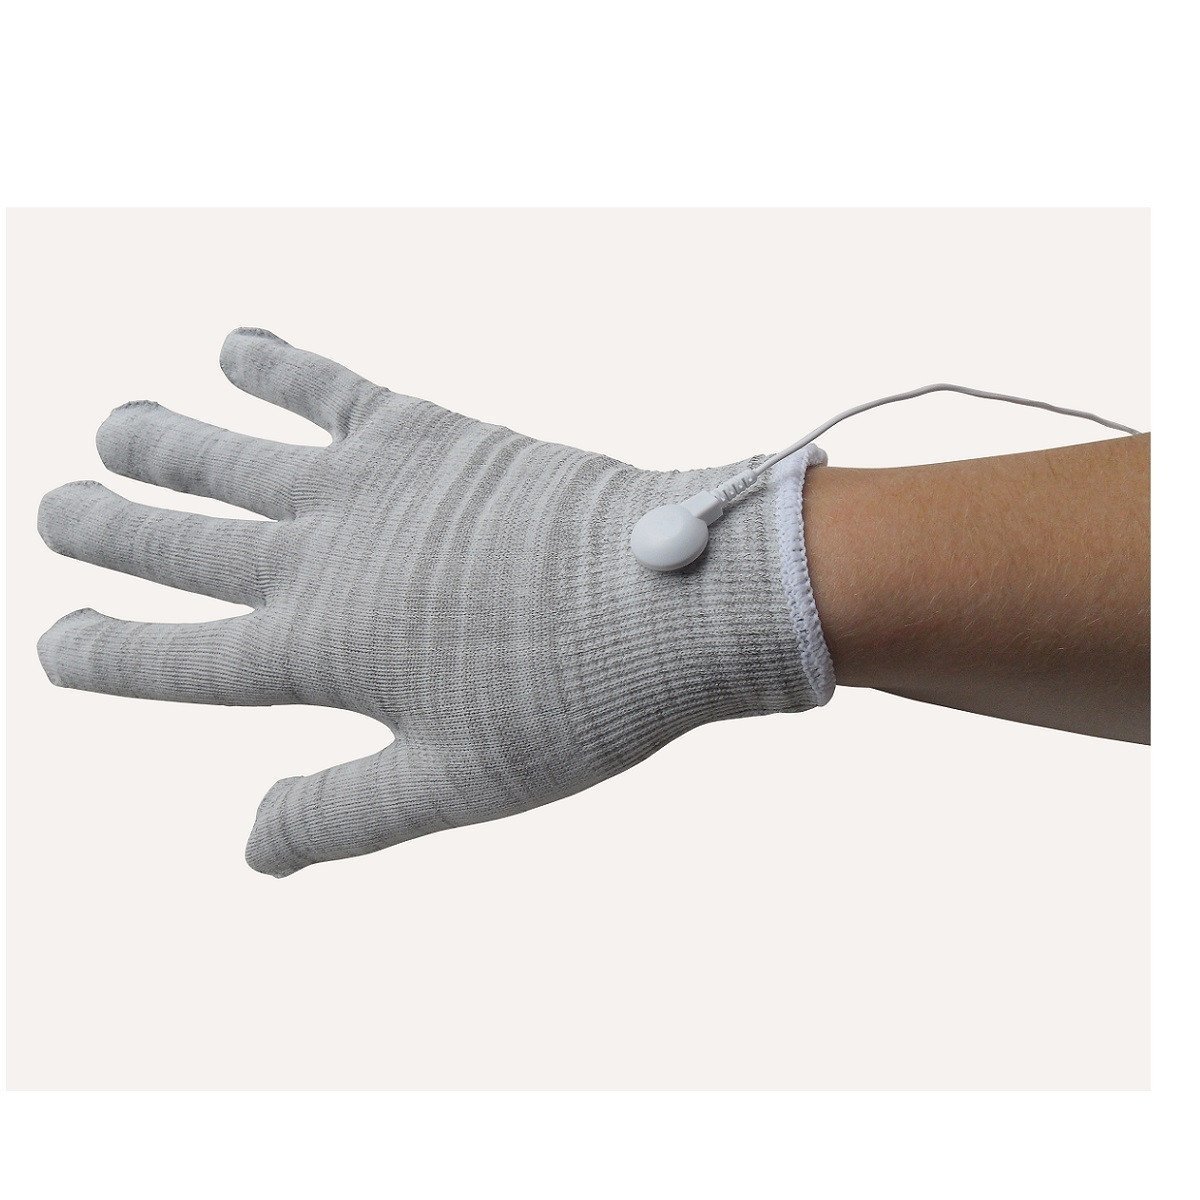 TENS Gloves for Circulation